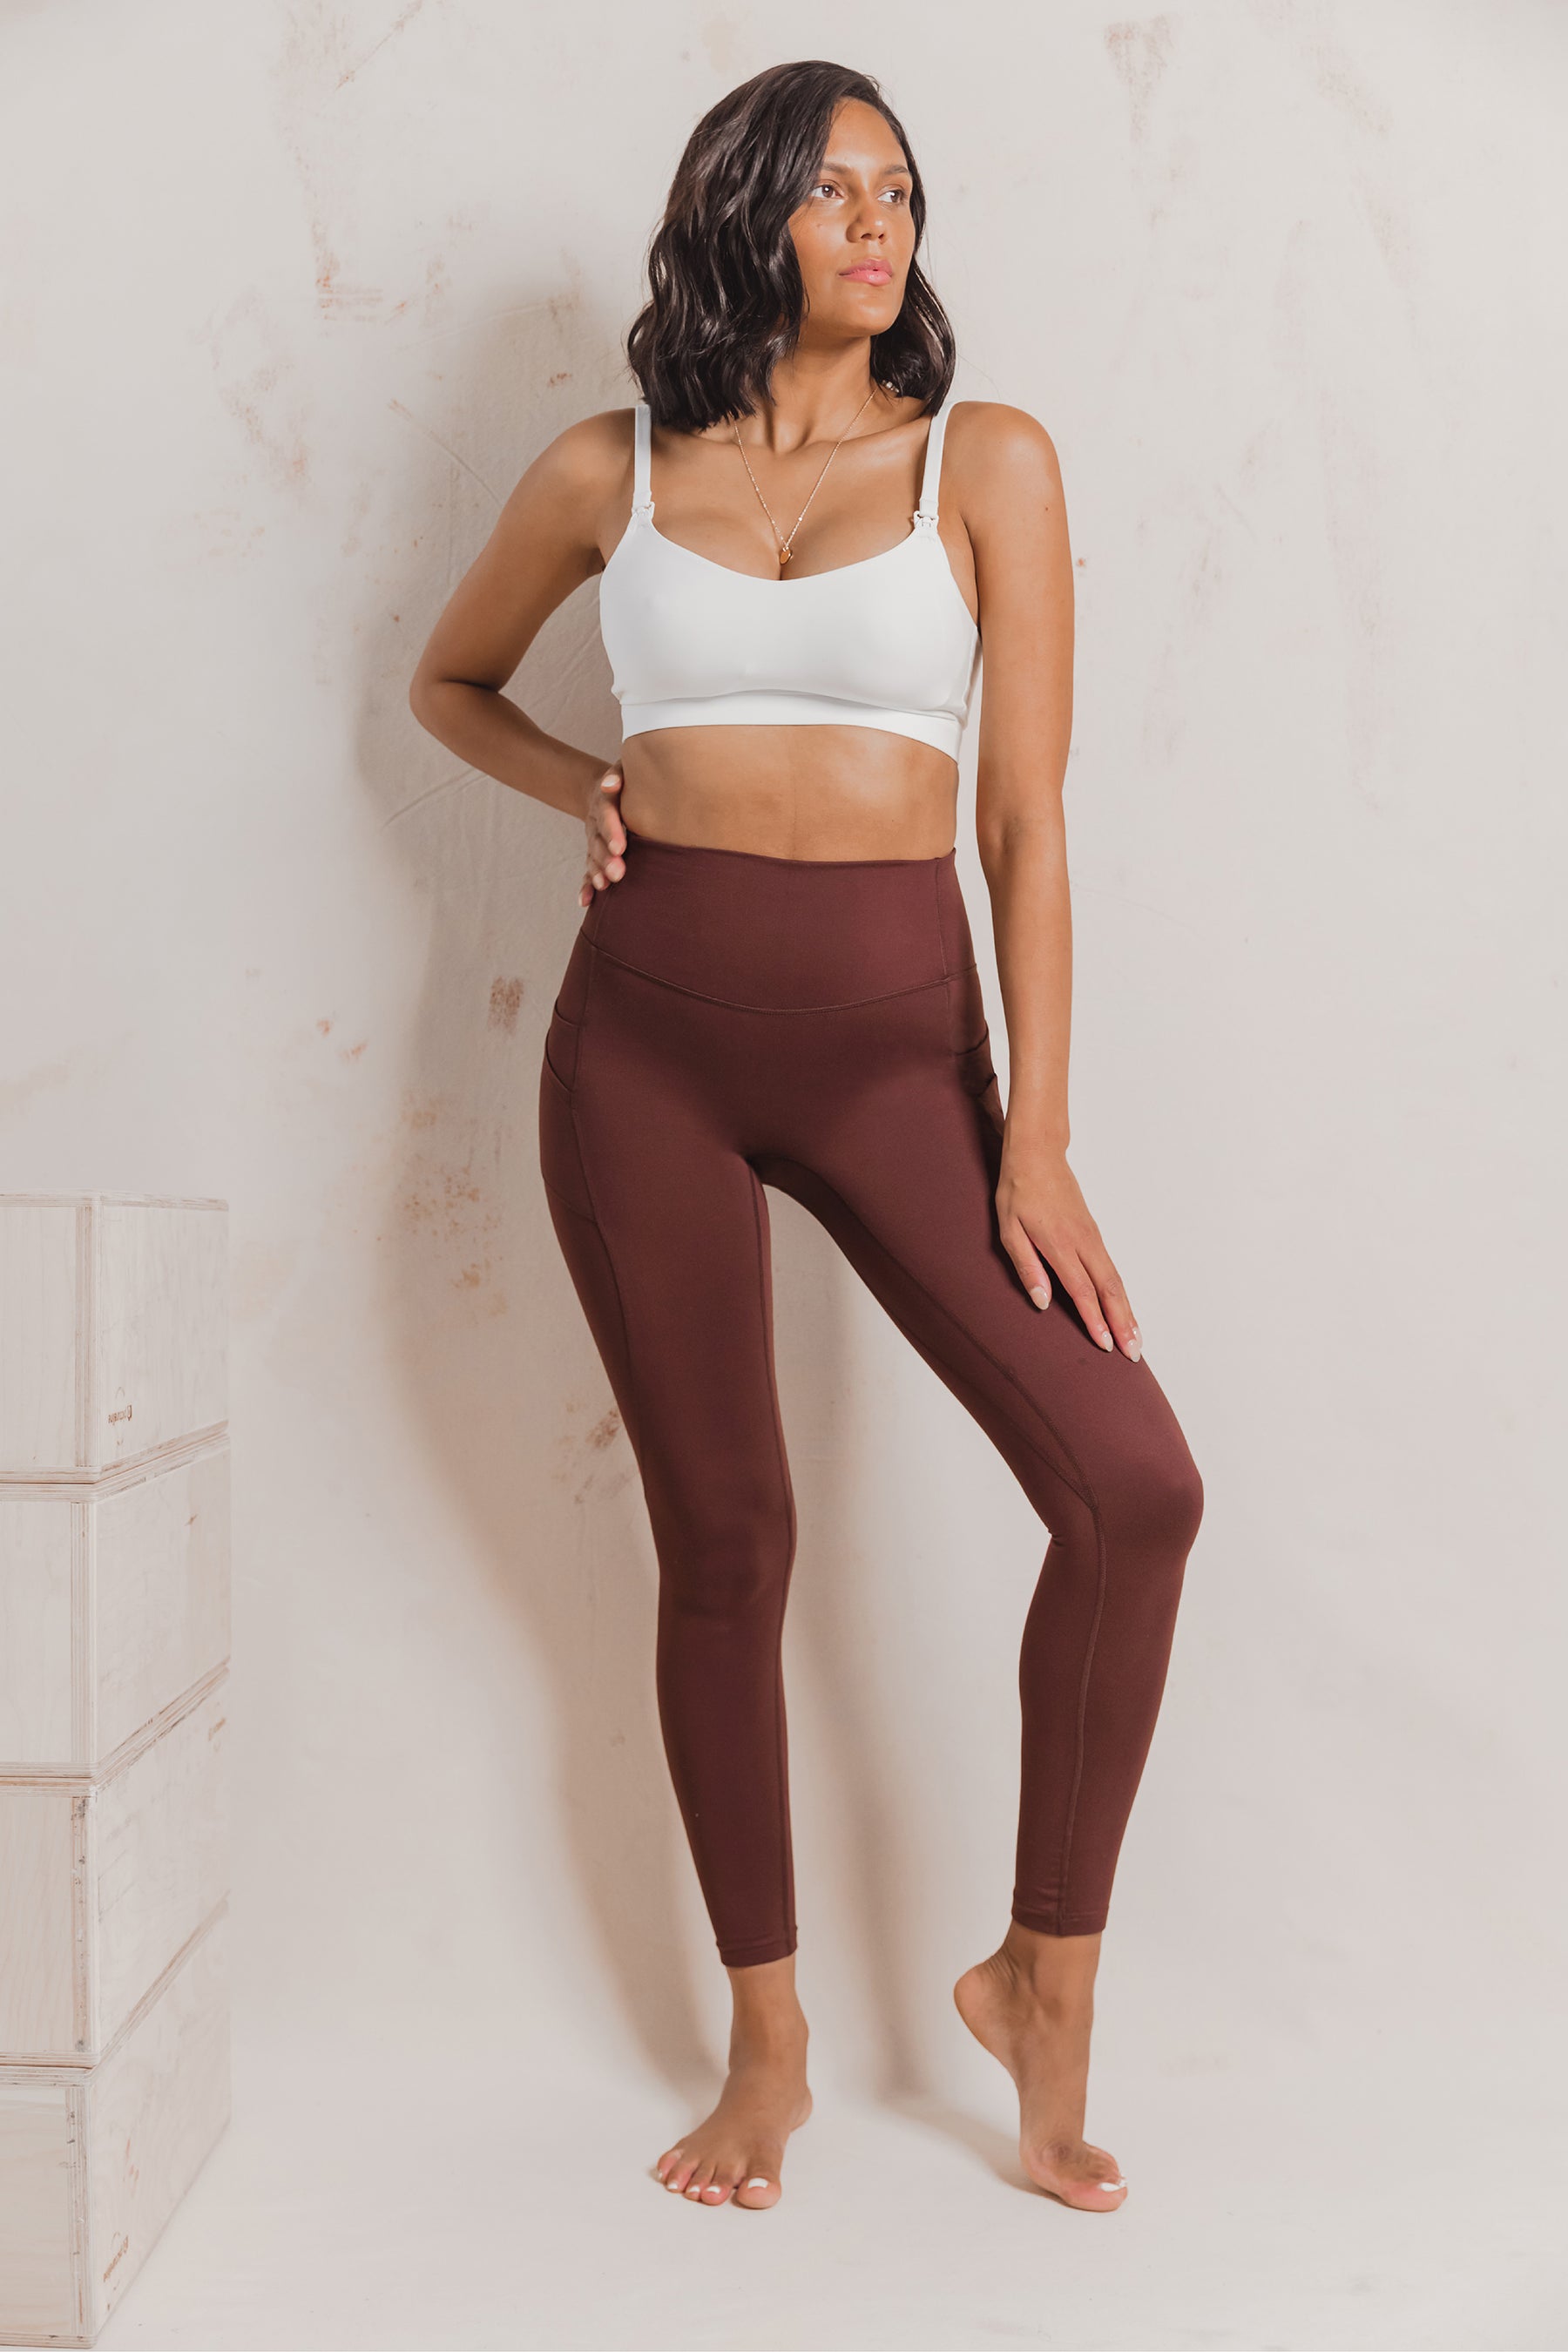 Compressive POCKET High-Rise Legging by Girlfriend Collective